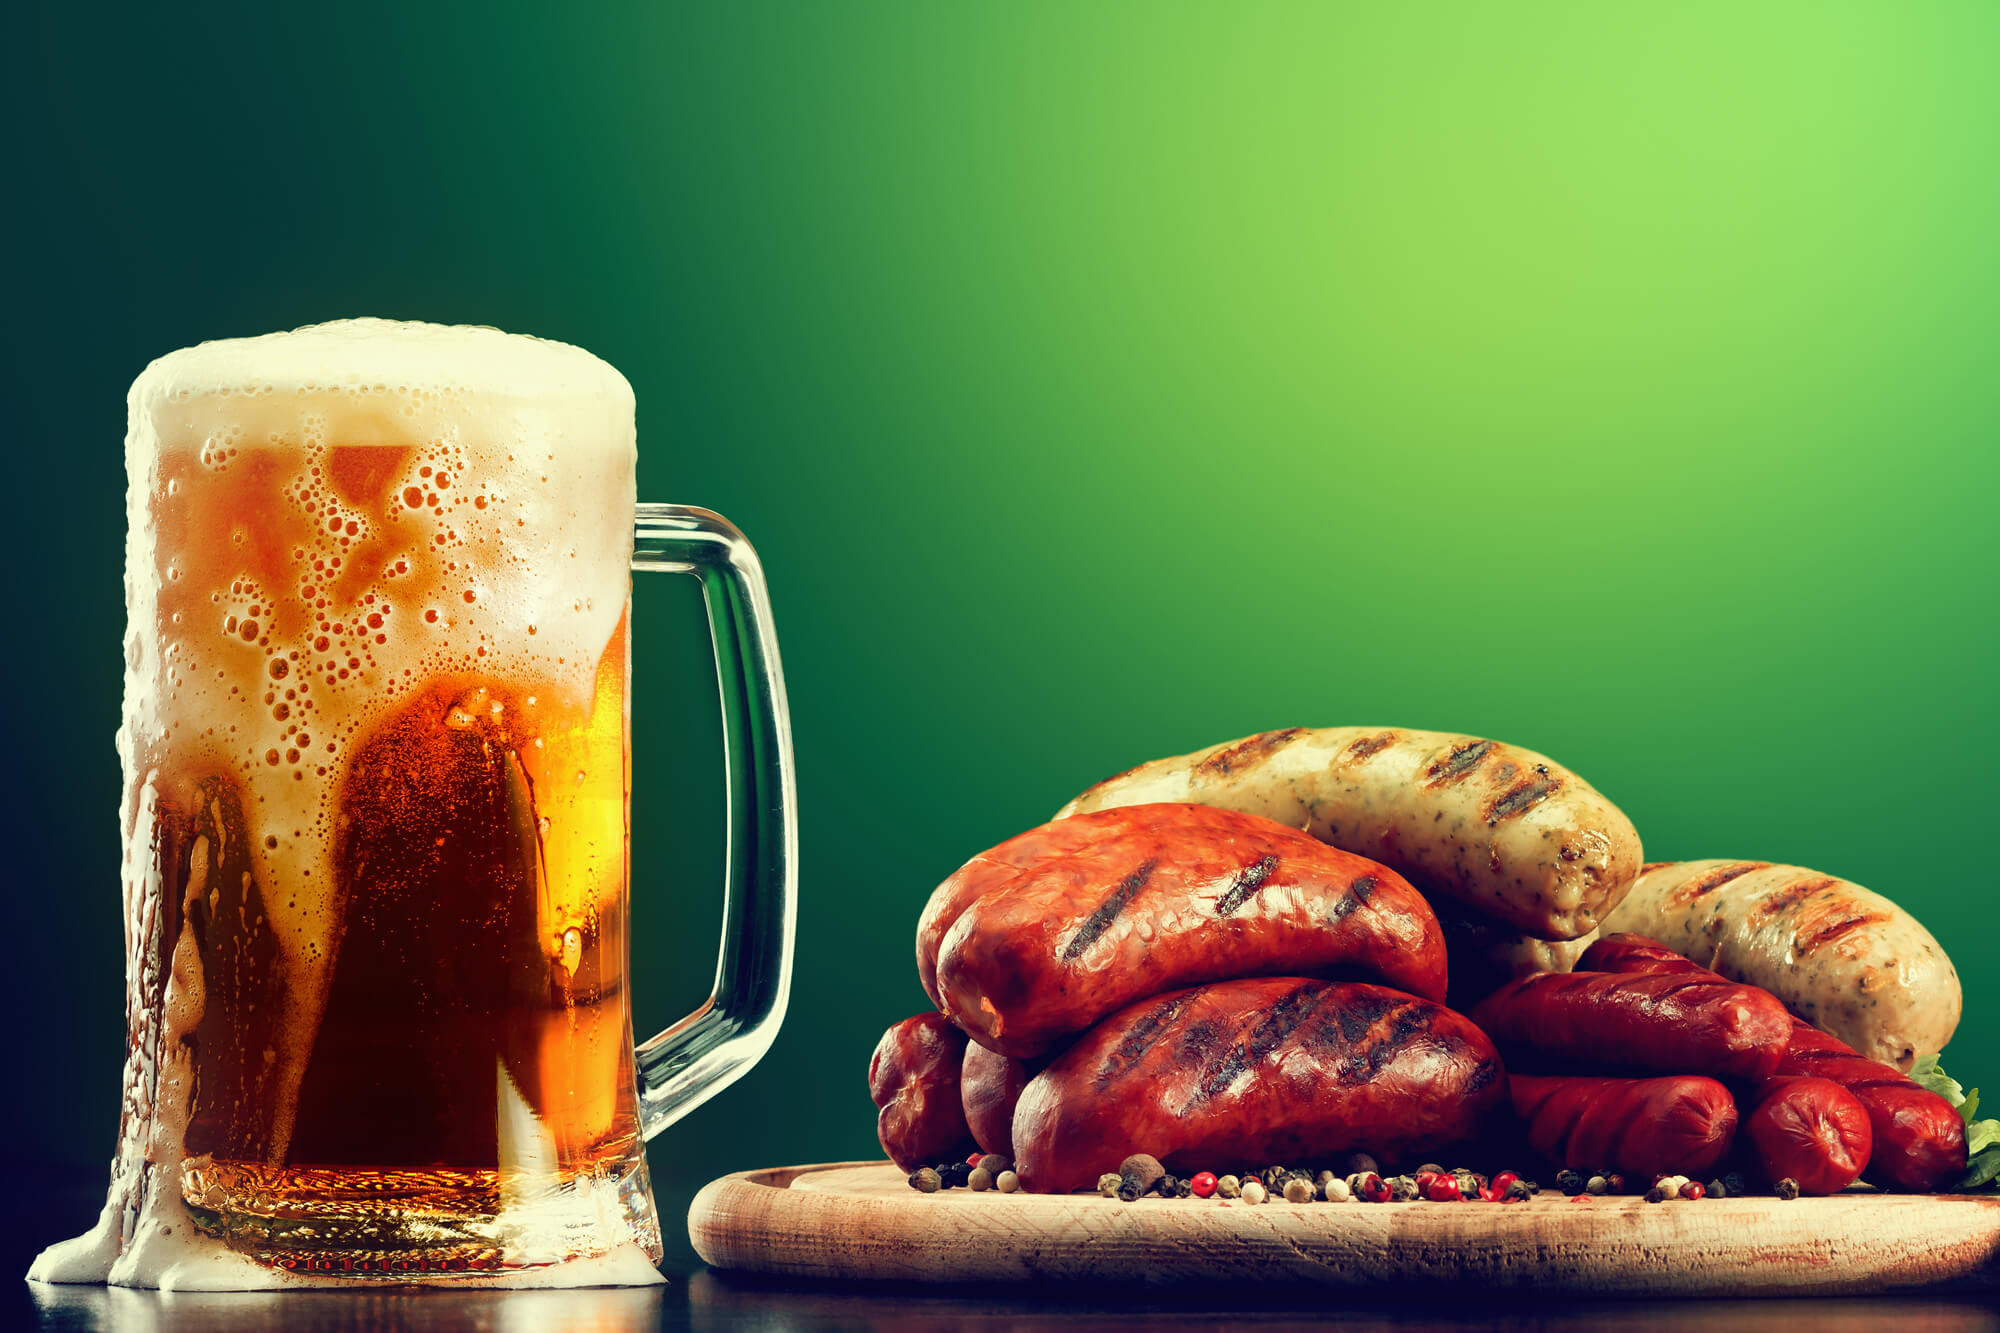 Beer and brats